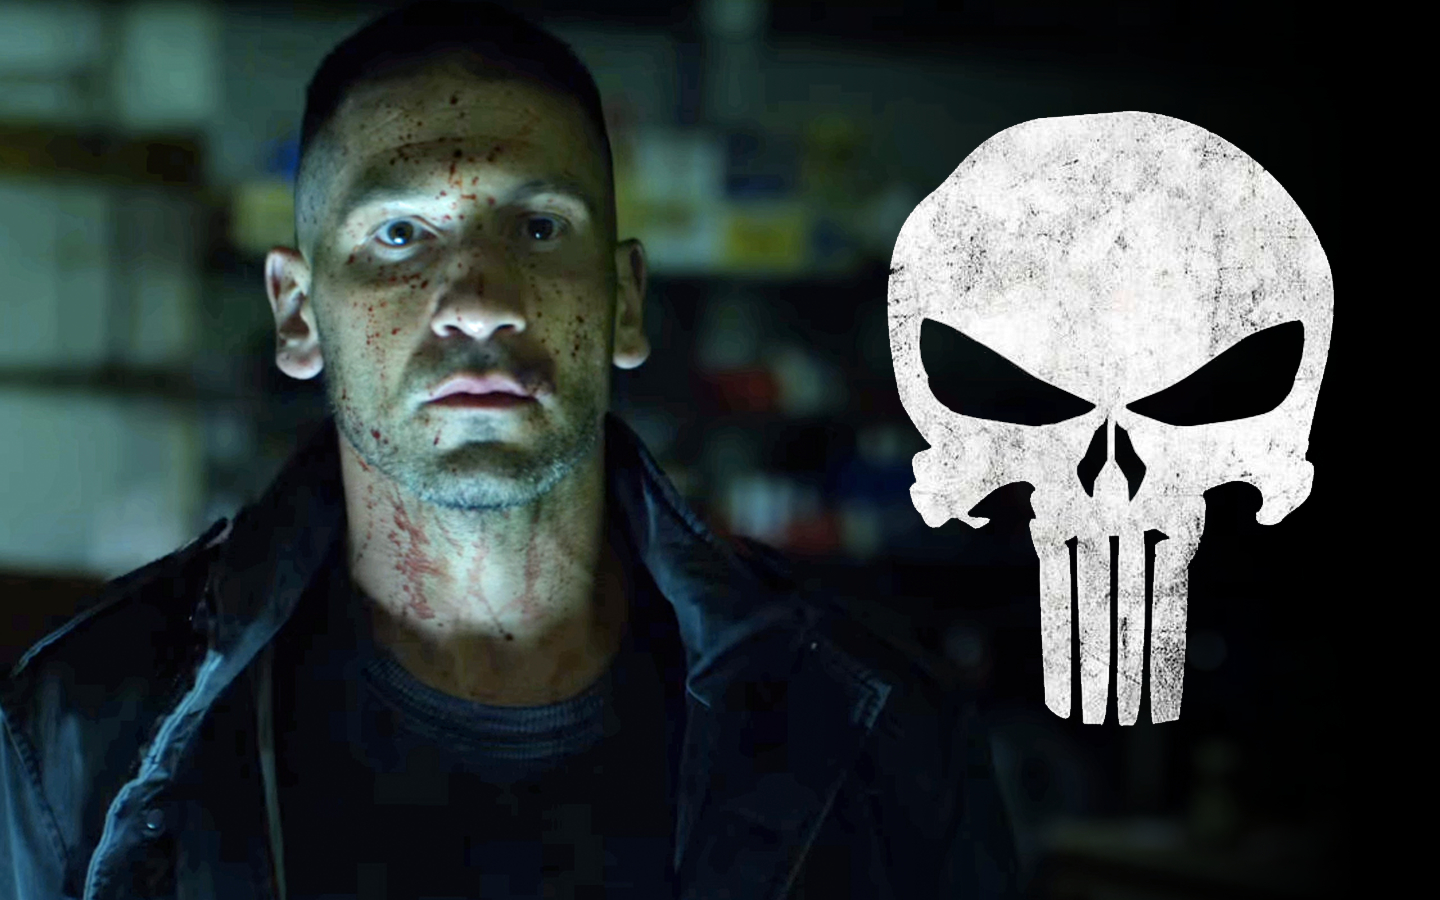 Jon Bernthal On His Role As The Punisher: “It’s A Responsibility That I Take Enormously…”